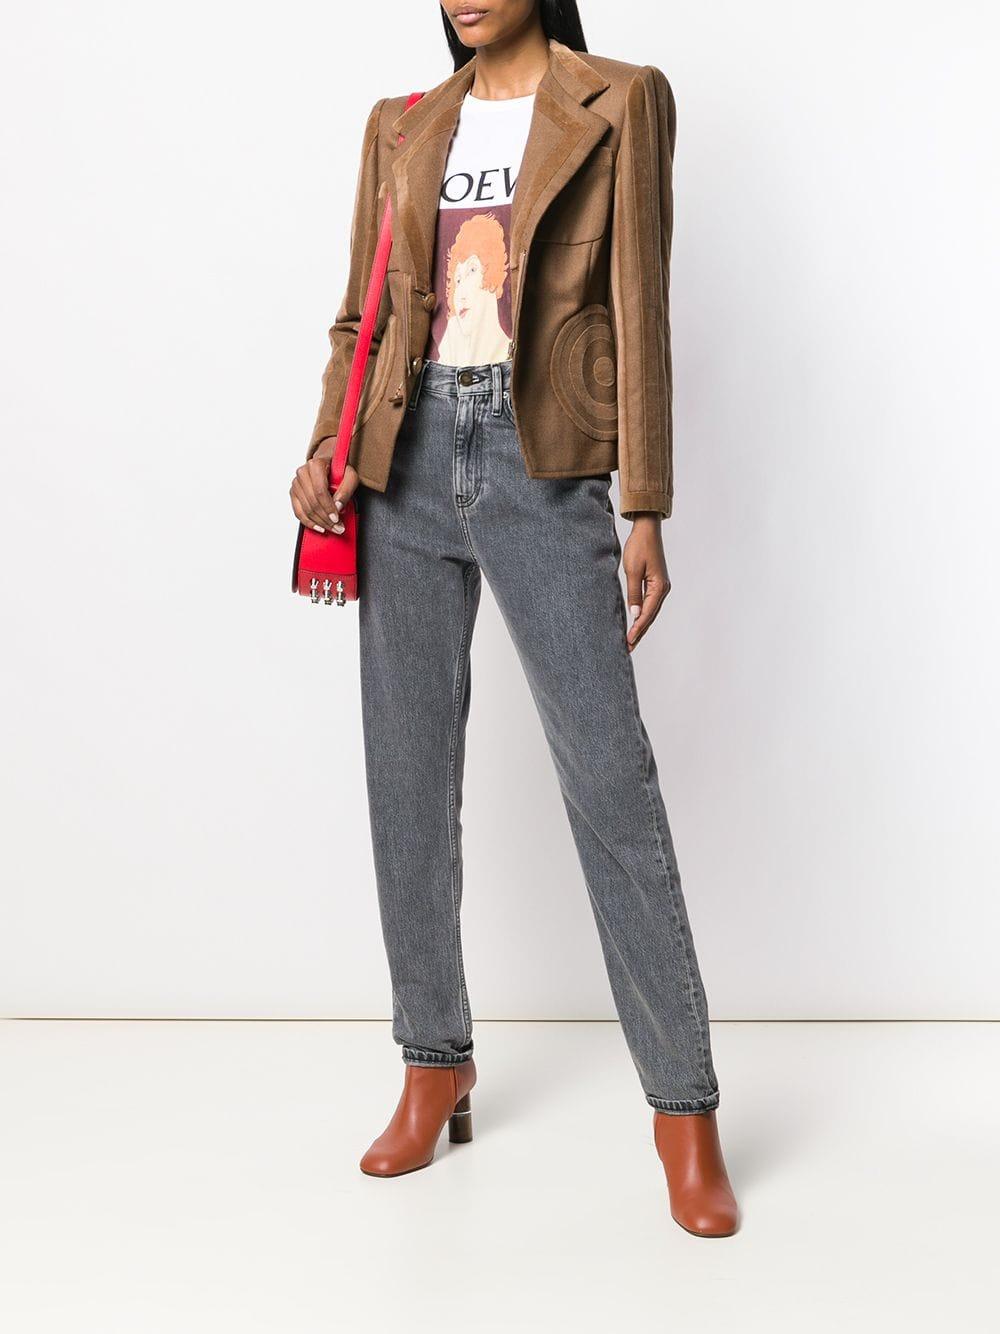 Valentino brown jacket with mandarin collar, double-breasted front closure with buttons with inner chain and invisible zip, long sleeves, padded shoulder straps, chest pockets, brown velvet trim and decorative inserts on the sleeves, on the front